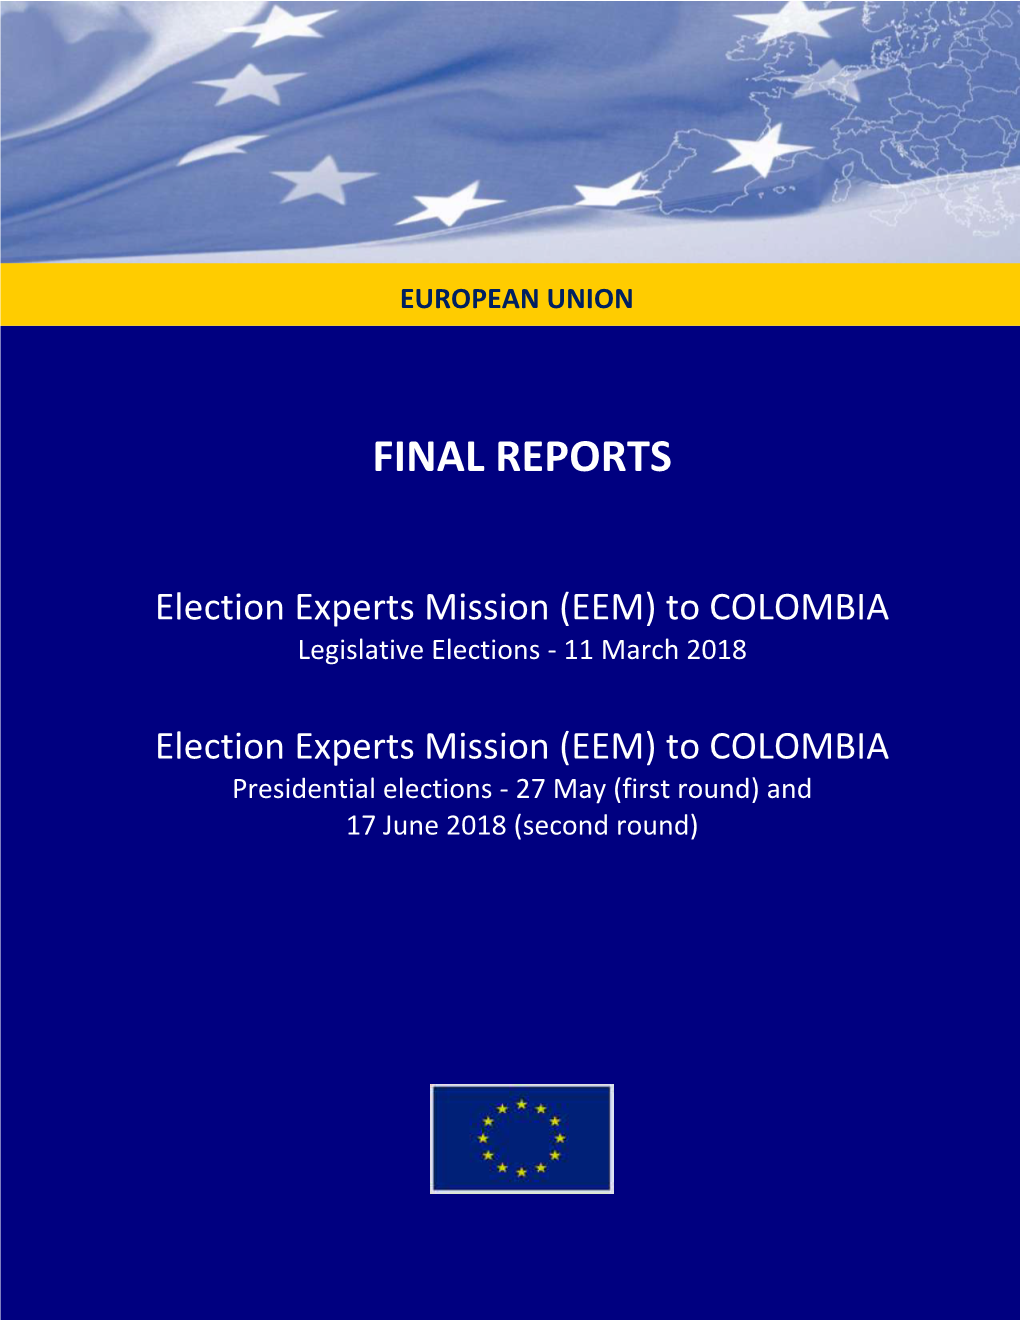 Final Reports